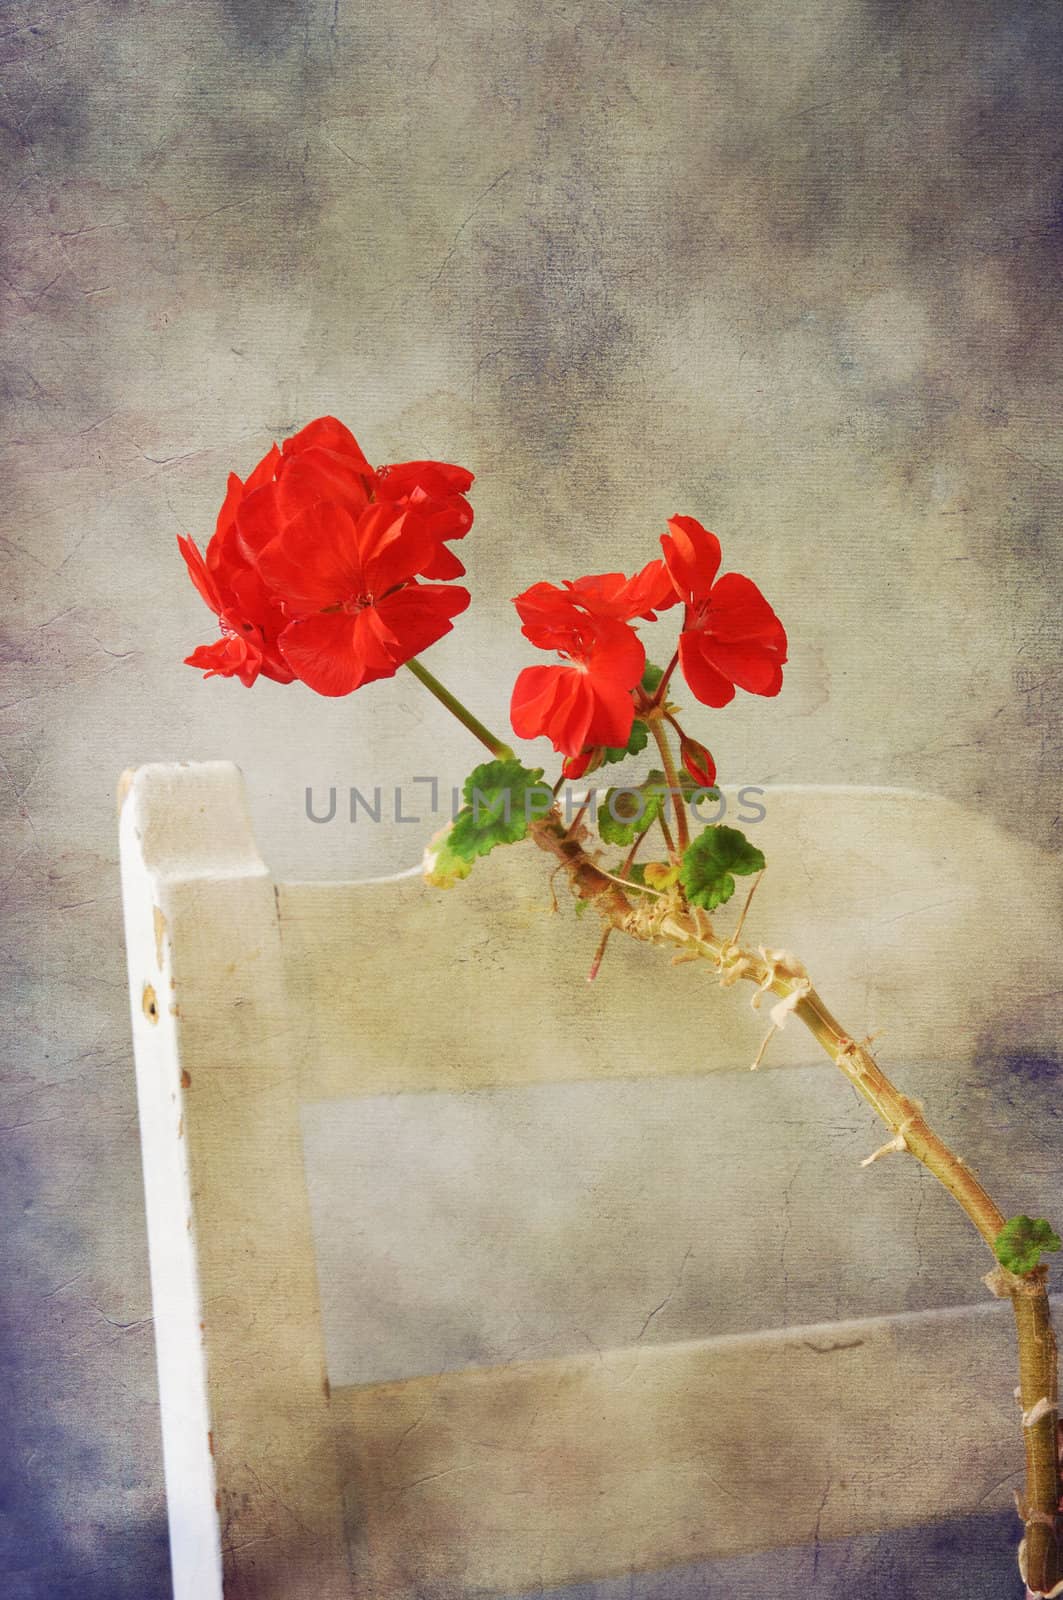 Red geranium on old vintage white chair in romantic texture.